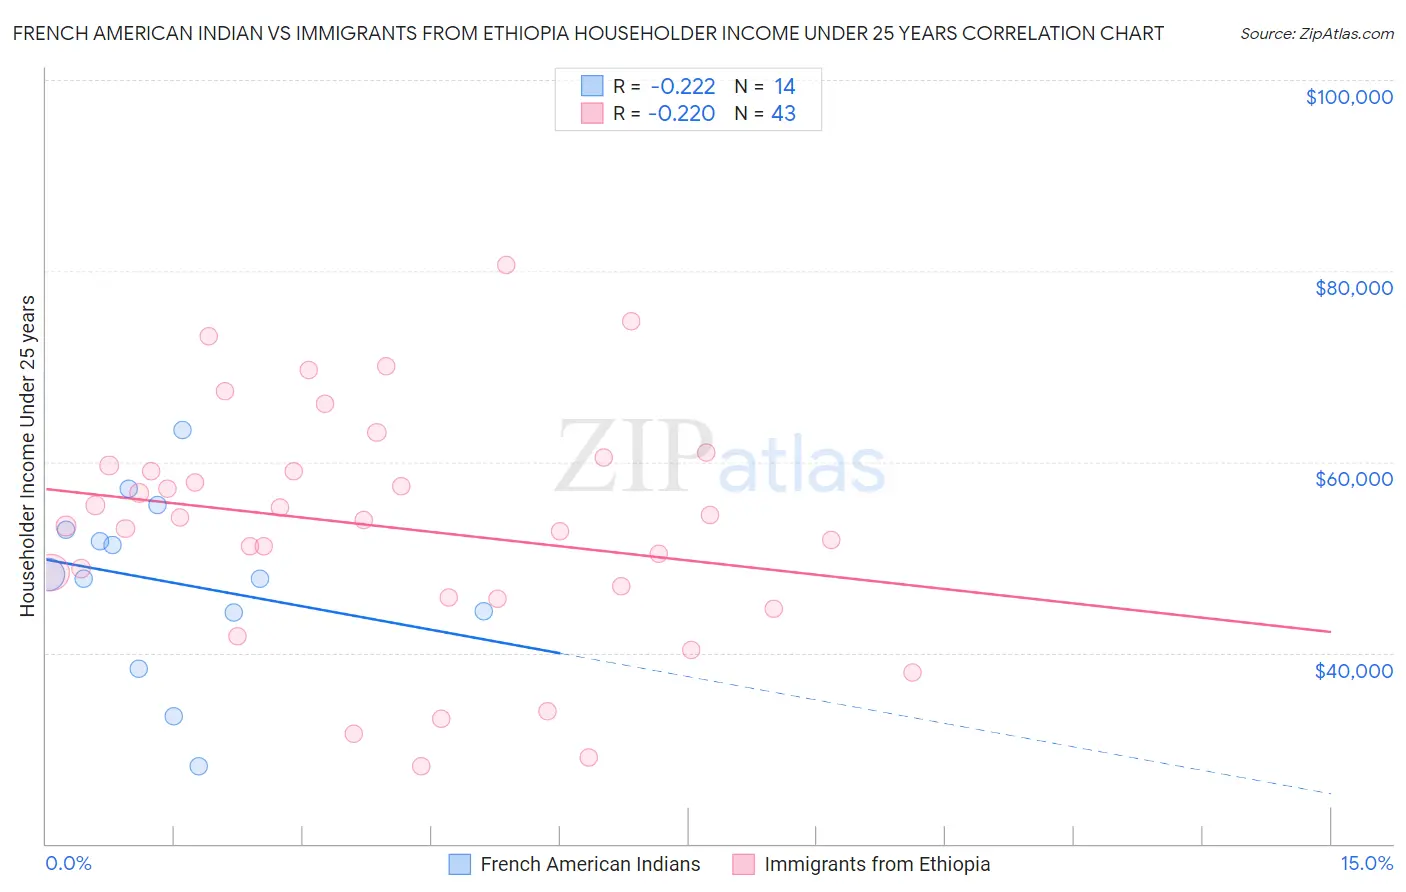 French American Indian vs Immigrants from Ethiopia Householder Income Under 25 years